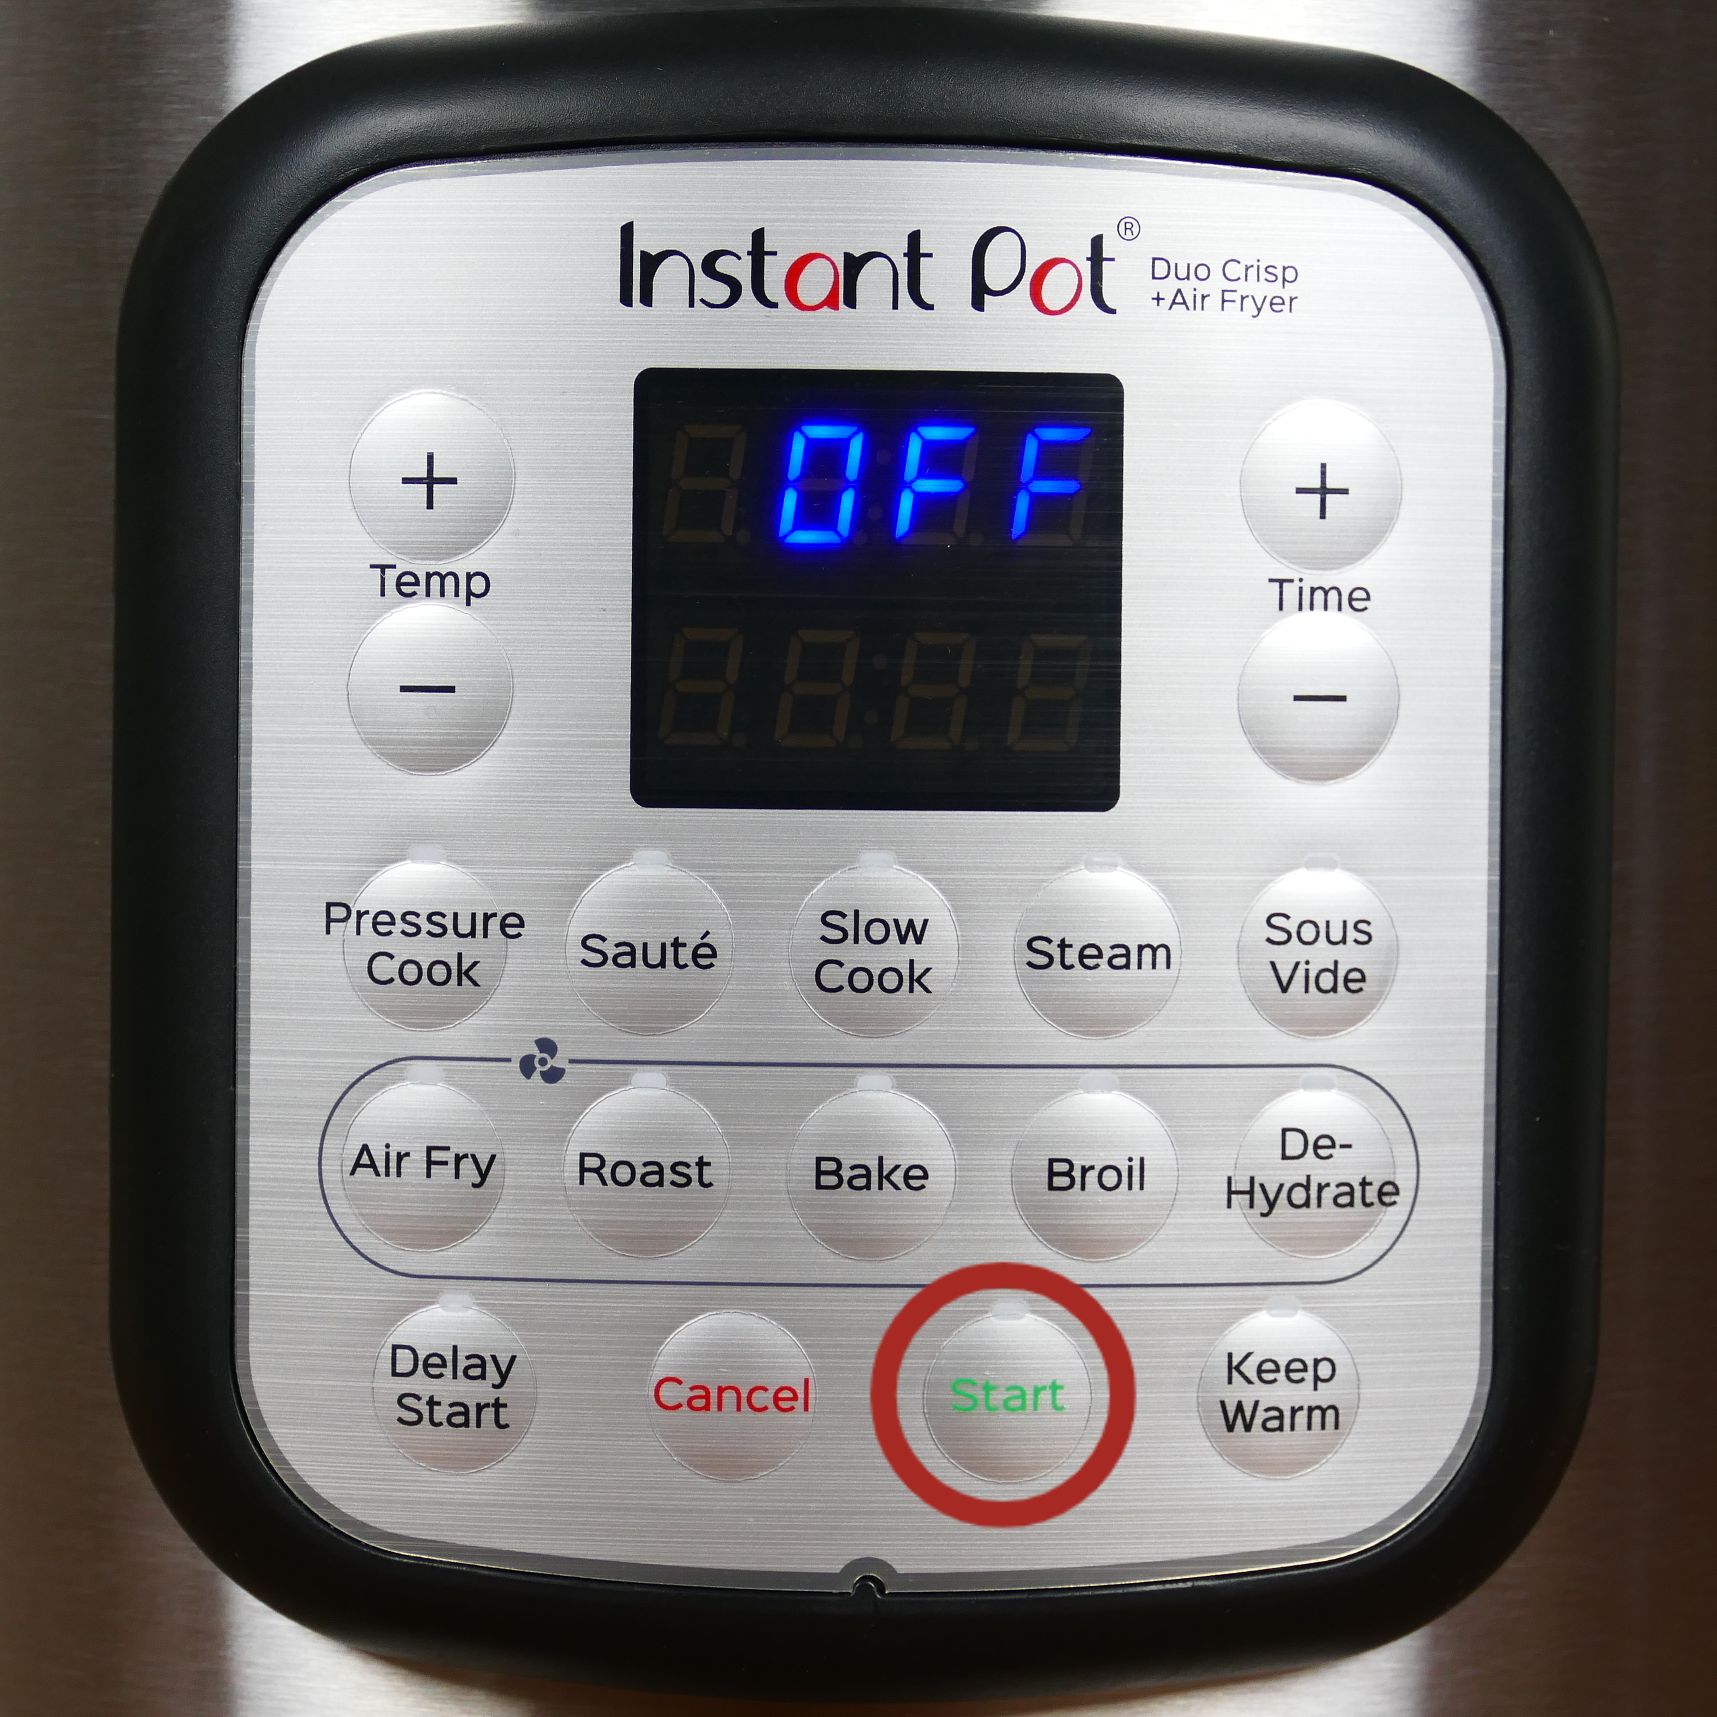 Instant Pot Duo Crisp Display Panel Start button circled in red